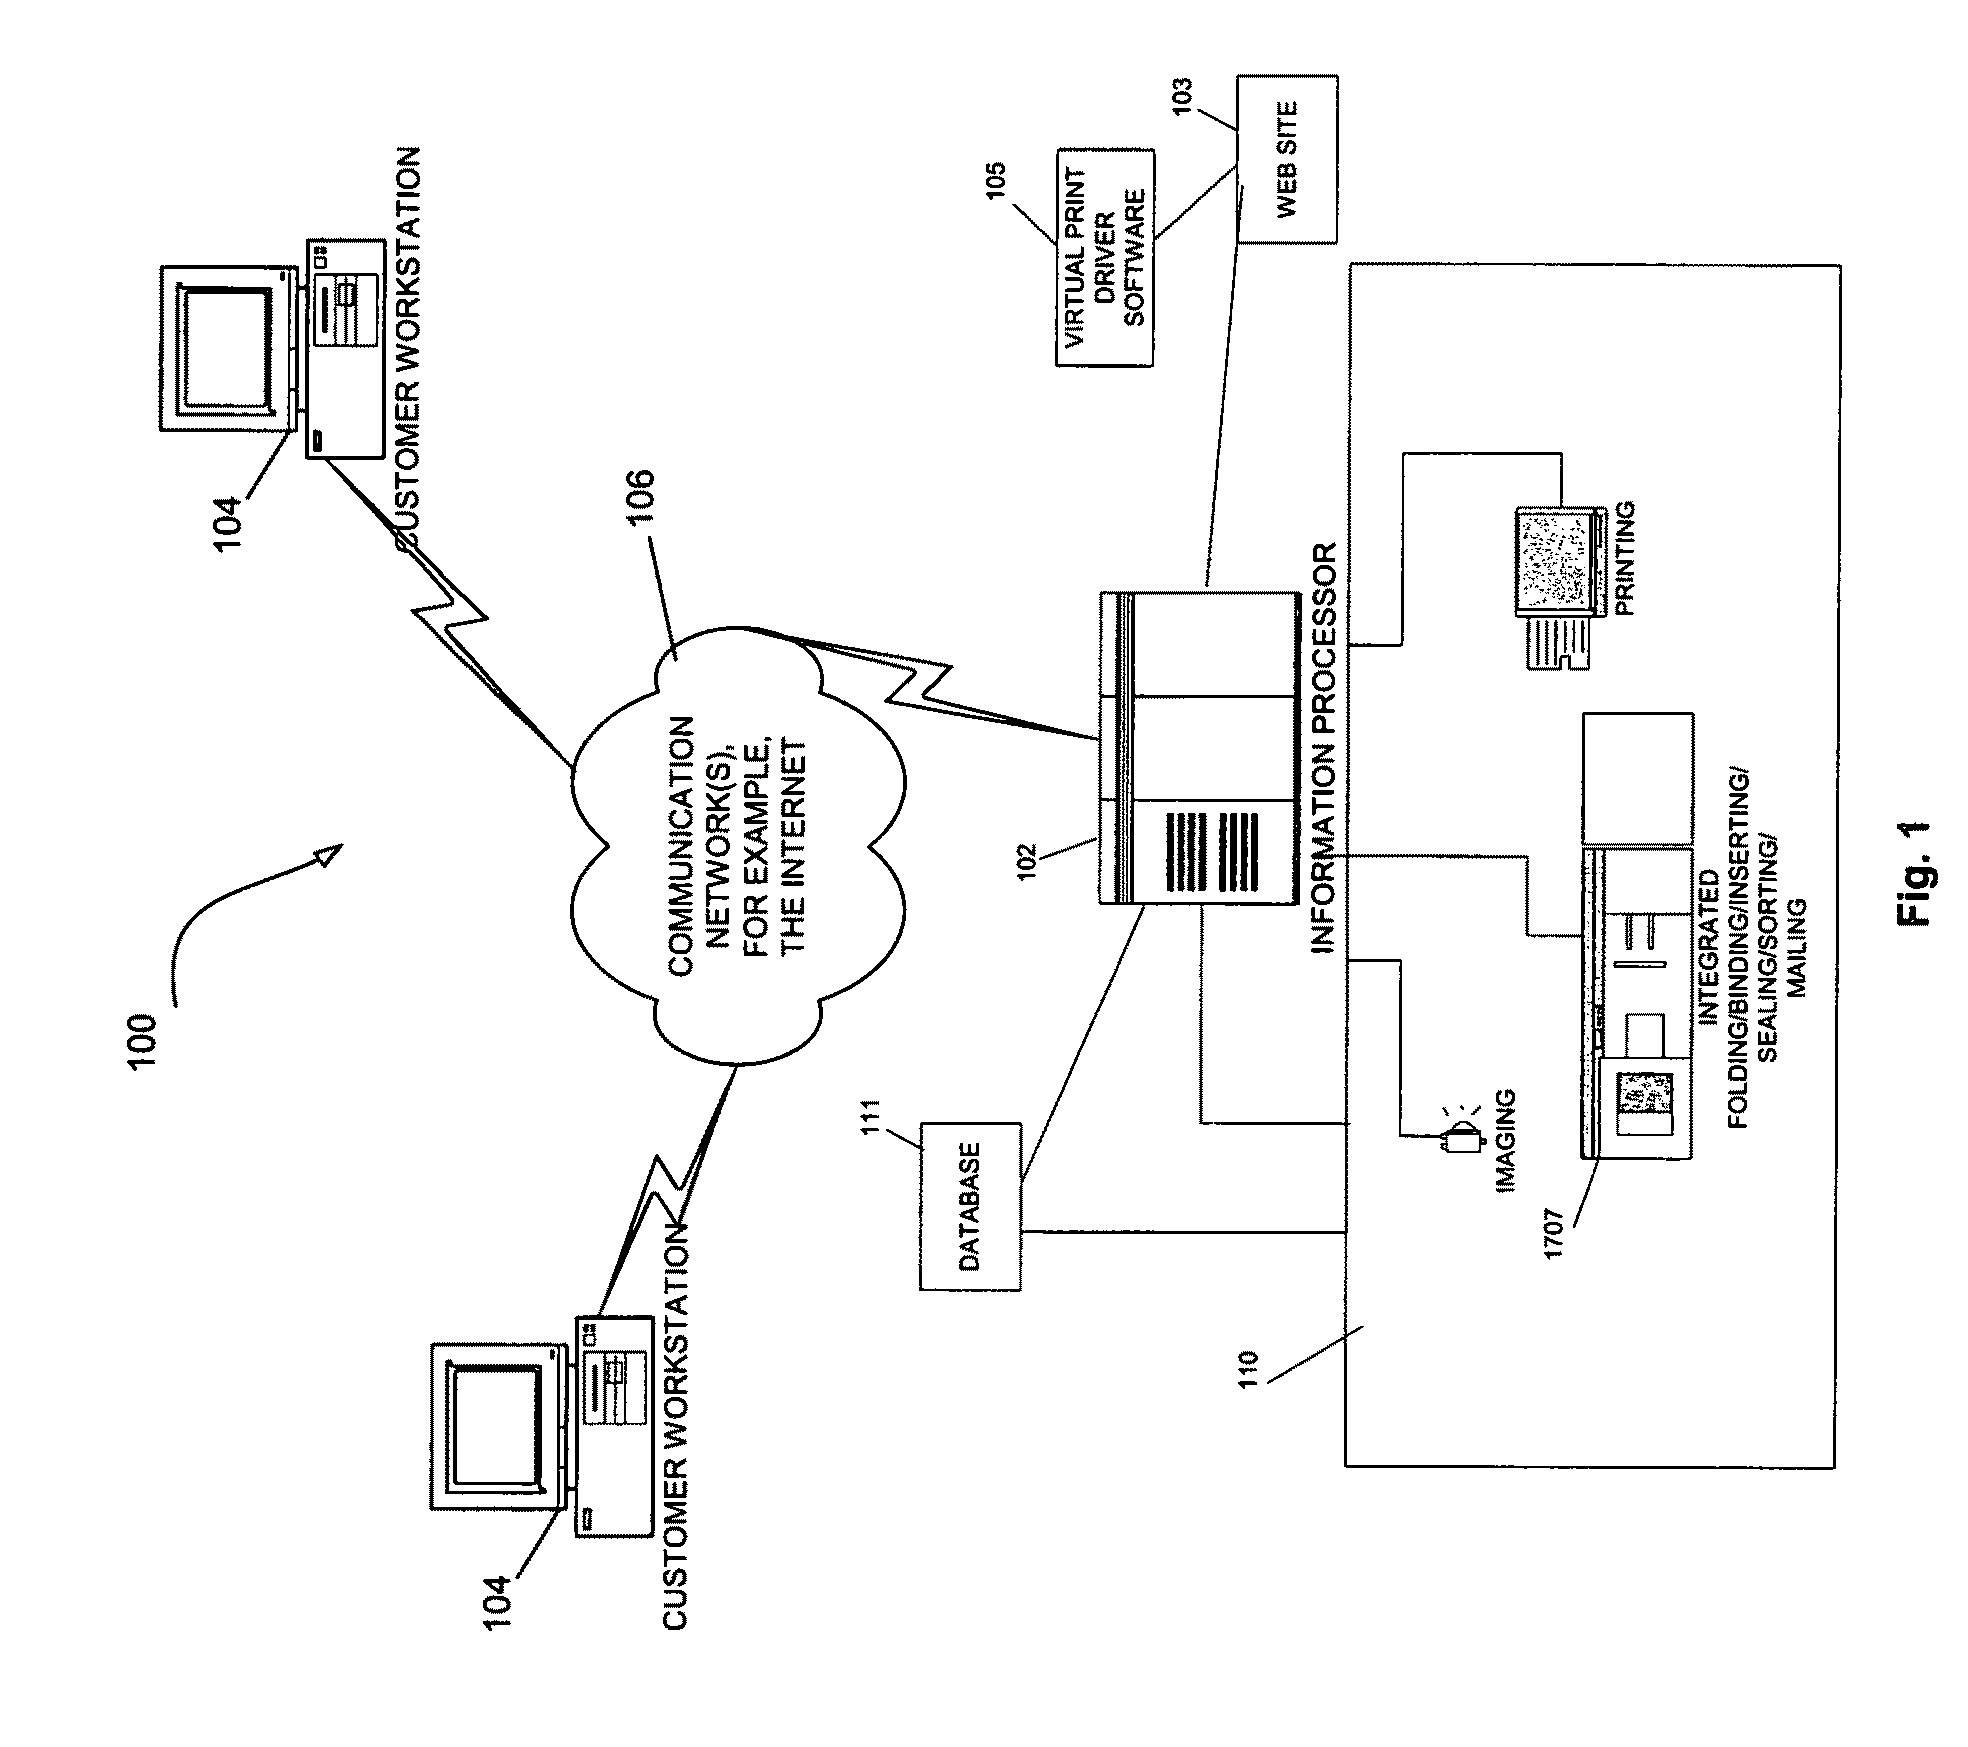 System and method for certifying and authenticating correspondence (II)